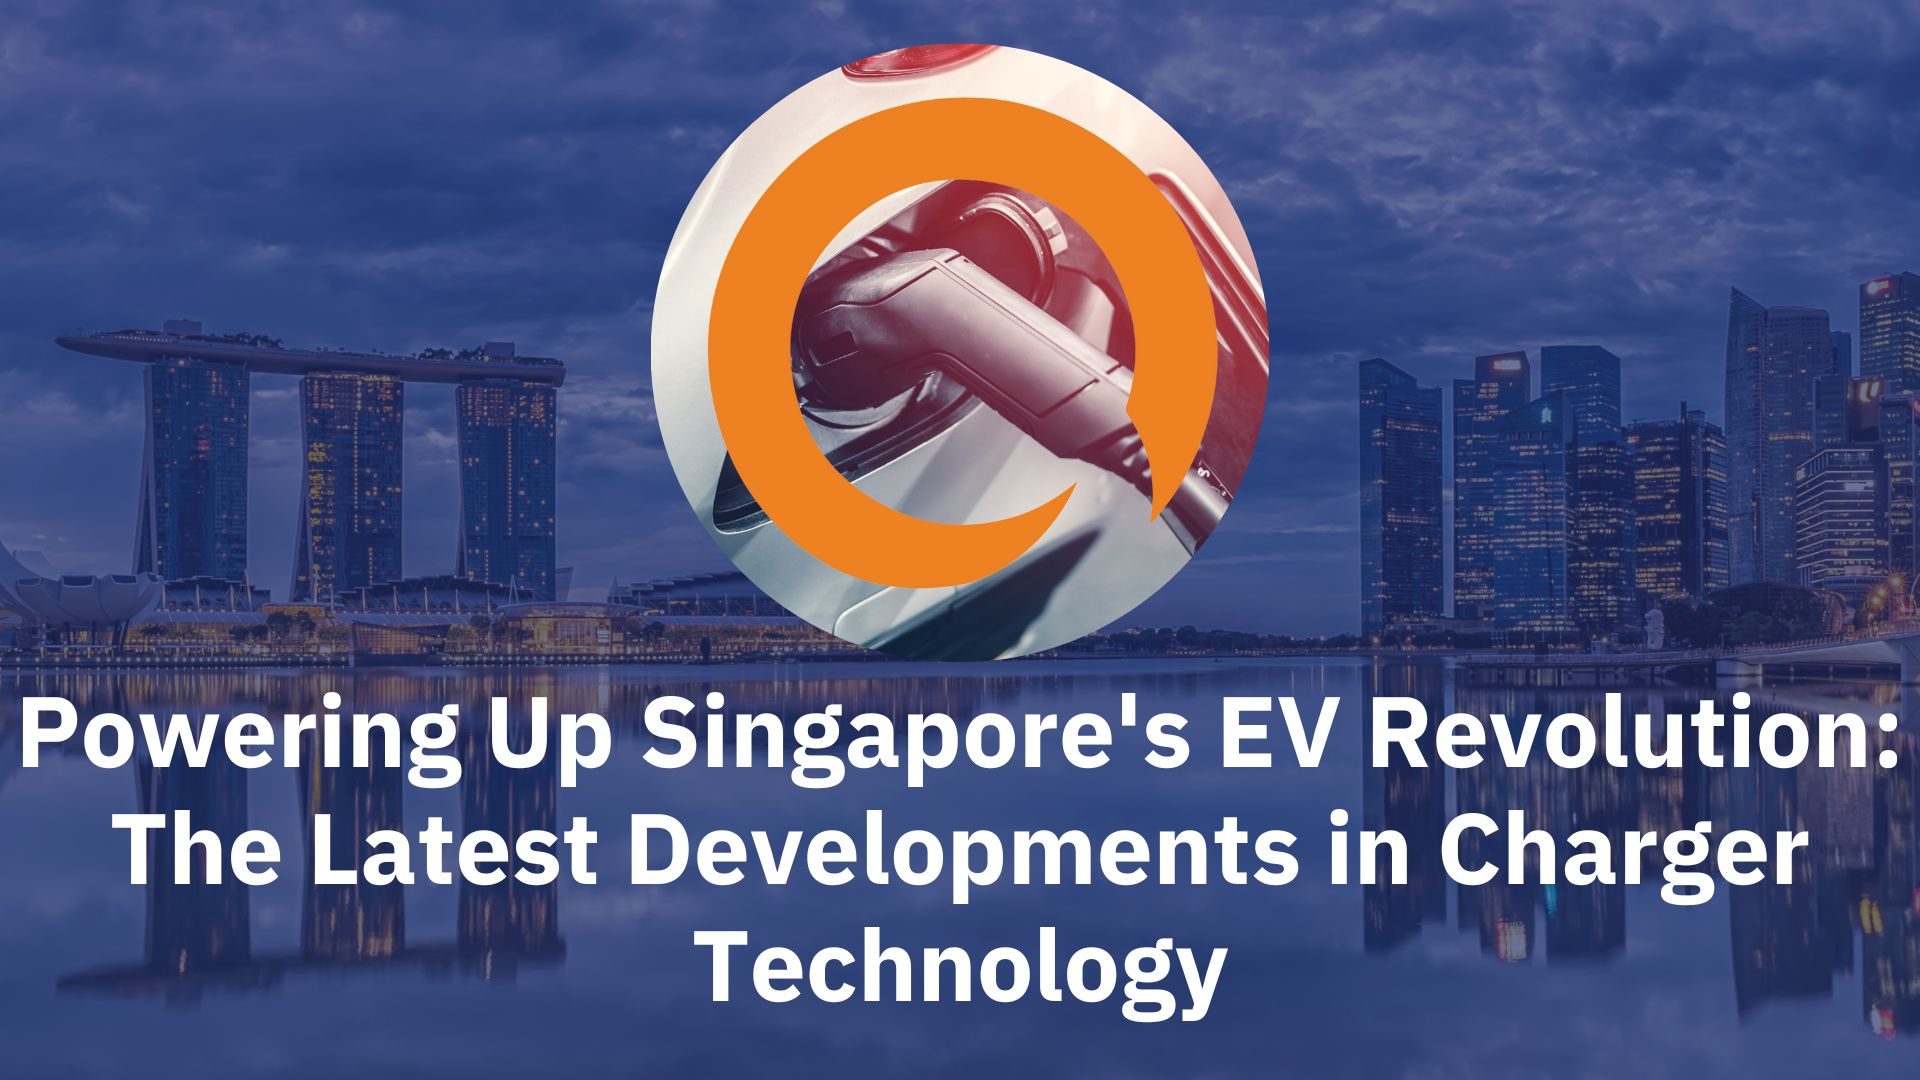 Powering Up Singapore's EV Revolution: The Latest Developments in Charger Technology